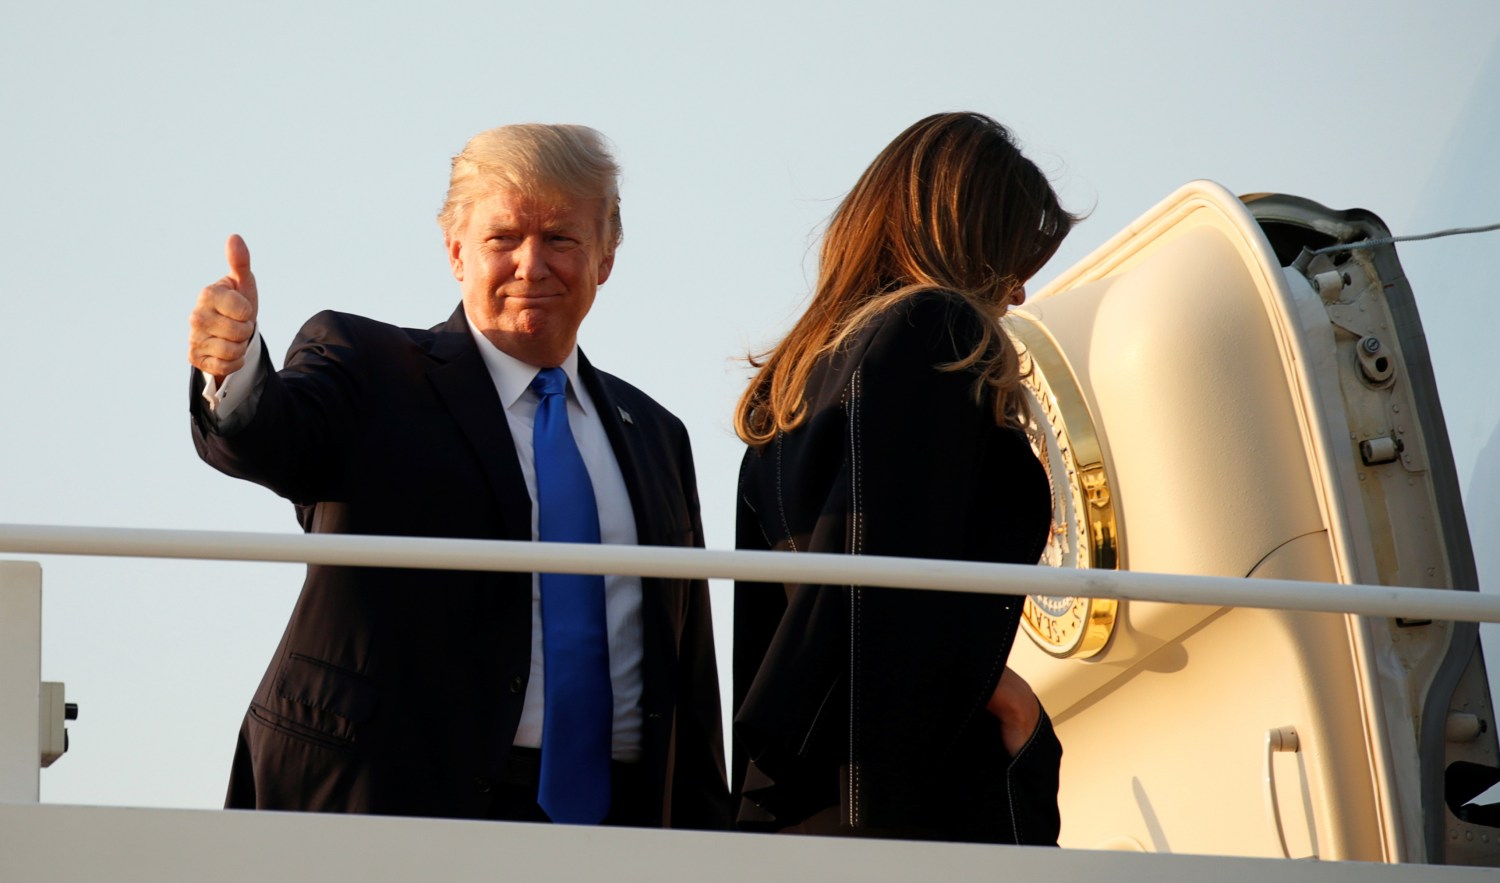 U.S. President Donald Trump gives a thumbs up as he and first lady Melania Trump board Air Force One as they depart Joint Base Andrews in Maryland, U.S., July 12, 2017. REUTERS/Kevin Lamarque TPX IMAGES OF THE DAY - RTX3B7RA